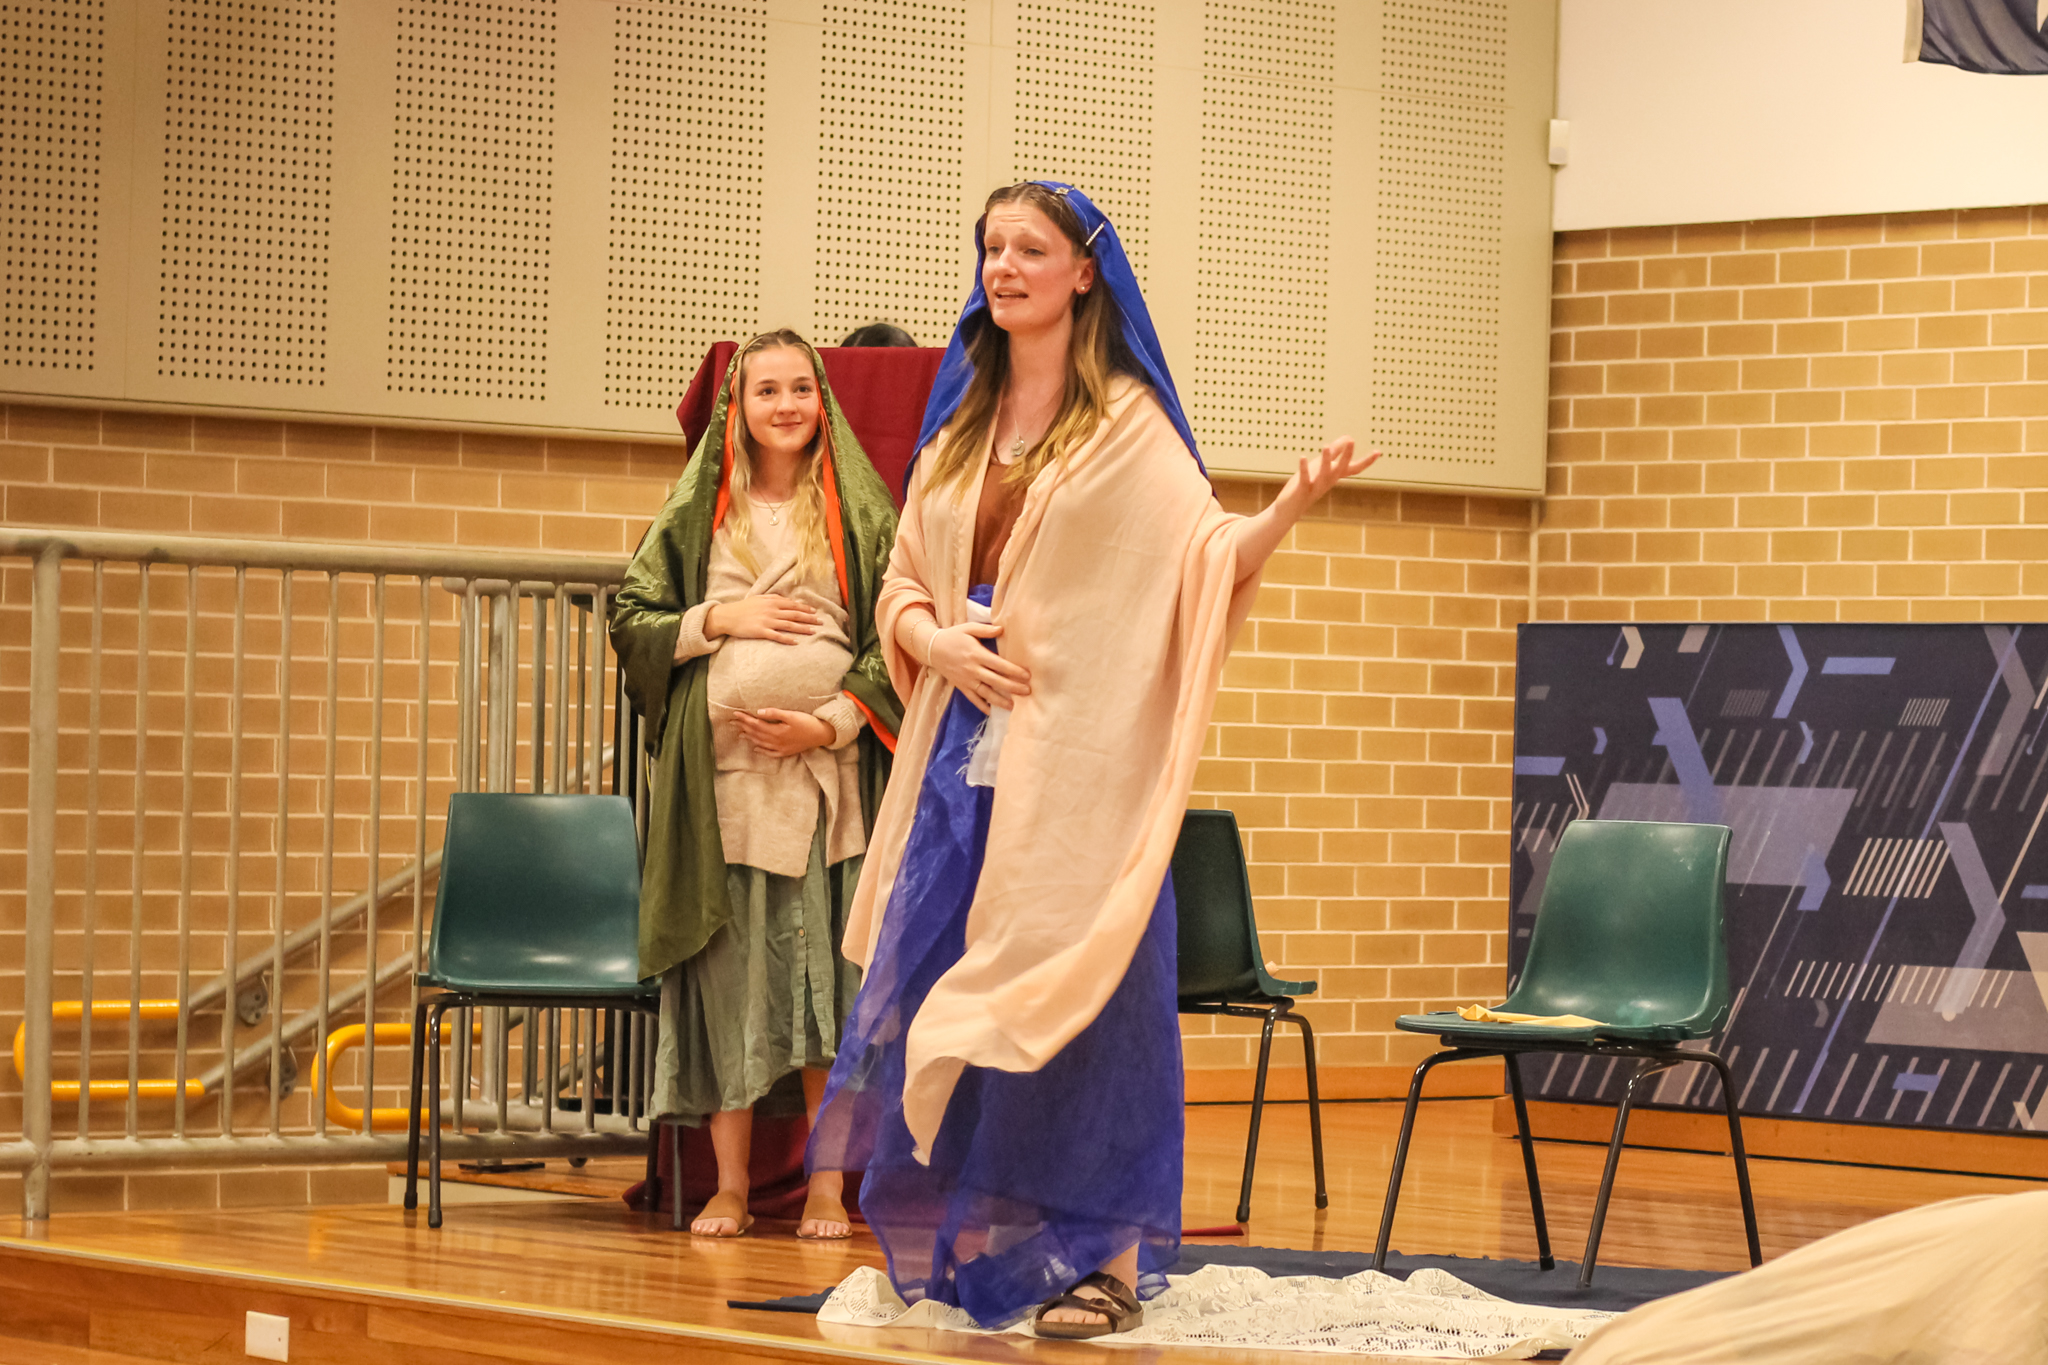 Theatre Society performs Nativity play for local school students